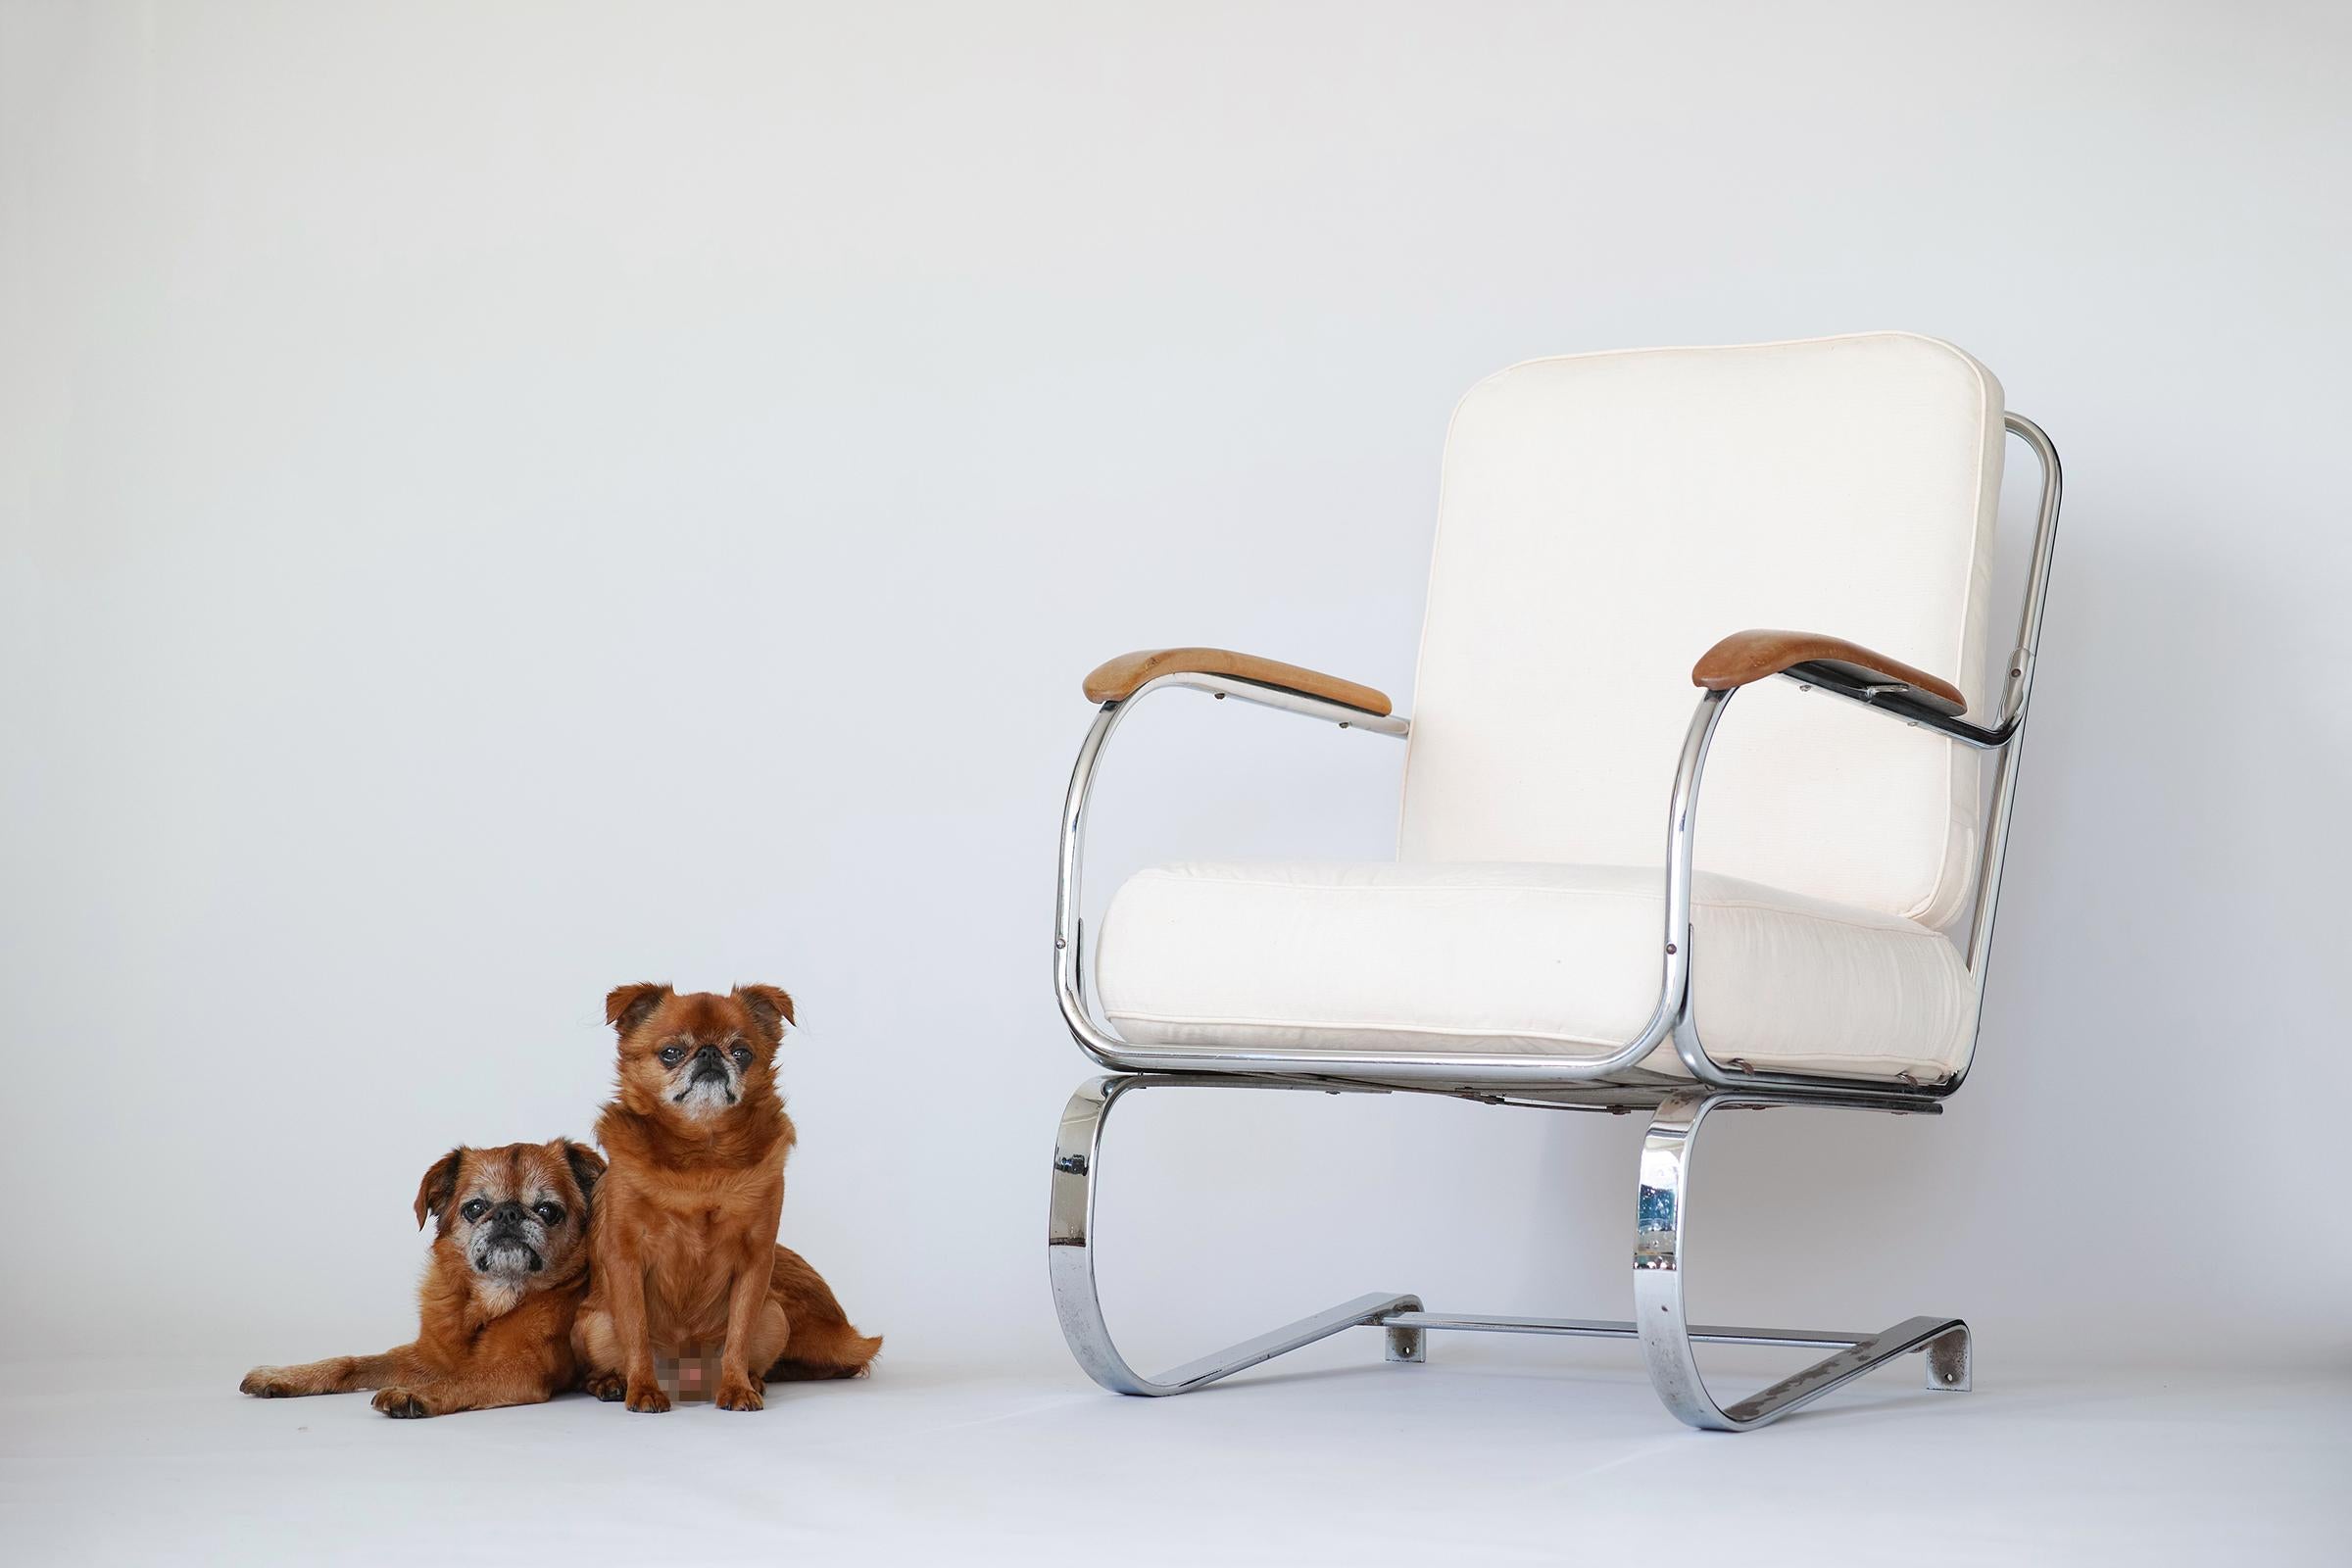 For your consideration is KEM Weber’s iconic machine age springer chair with ivory canvas upholstery and original chrome finish. The chair is notably comfortable and sturdy with a nice springy, rocker-like bounce.